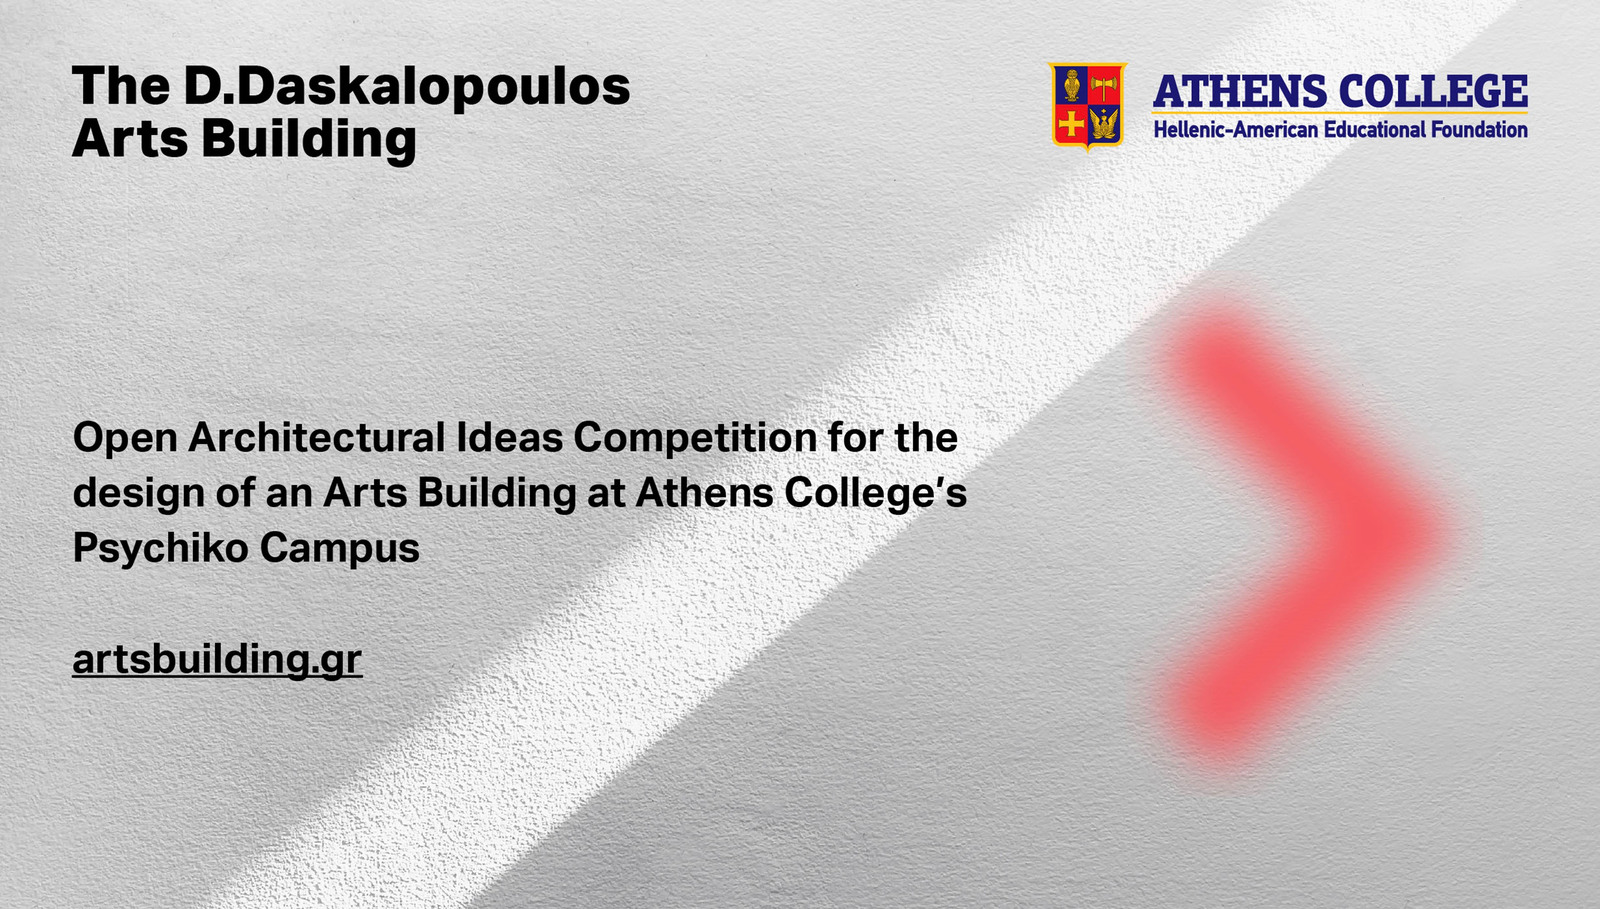 Archisearch Open Architectural Ideas Competition for the construction of an Arts Building_Deadline 22nd of November | Athens College & SYNNEON